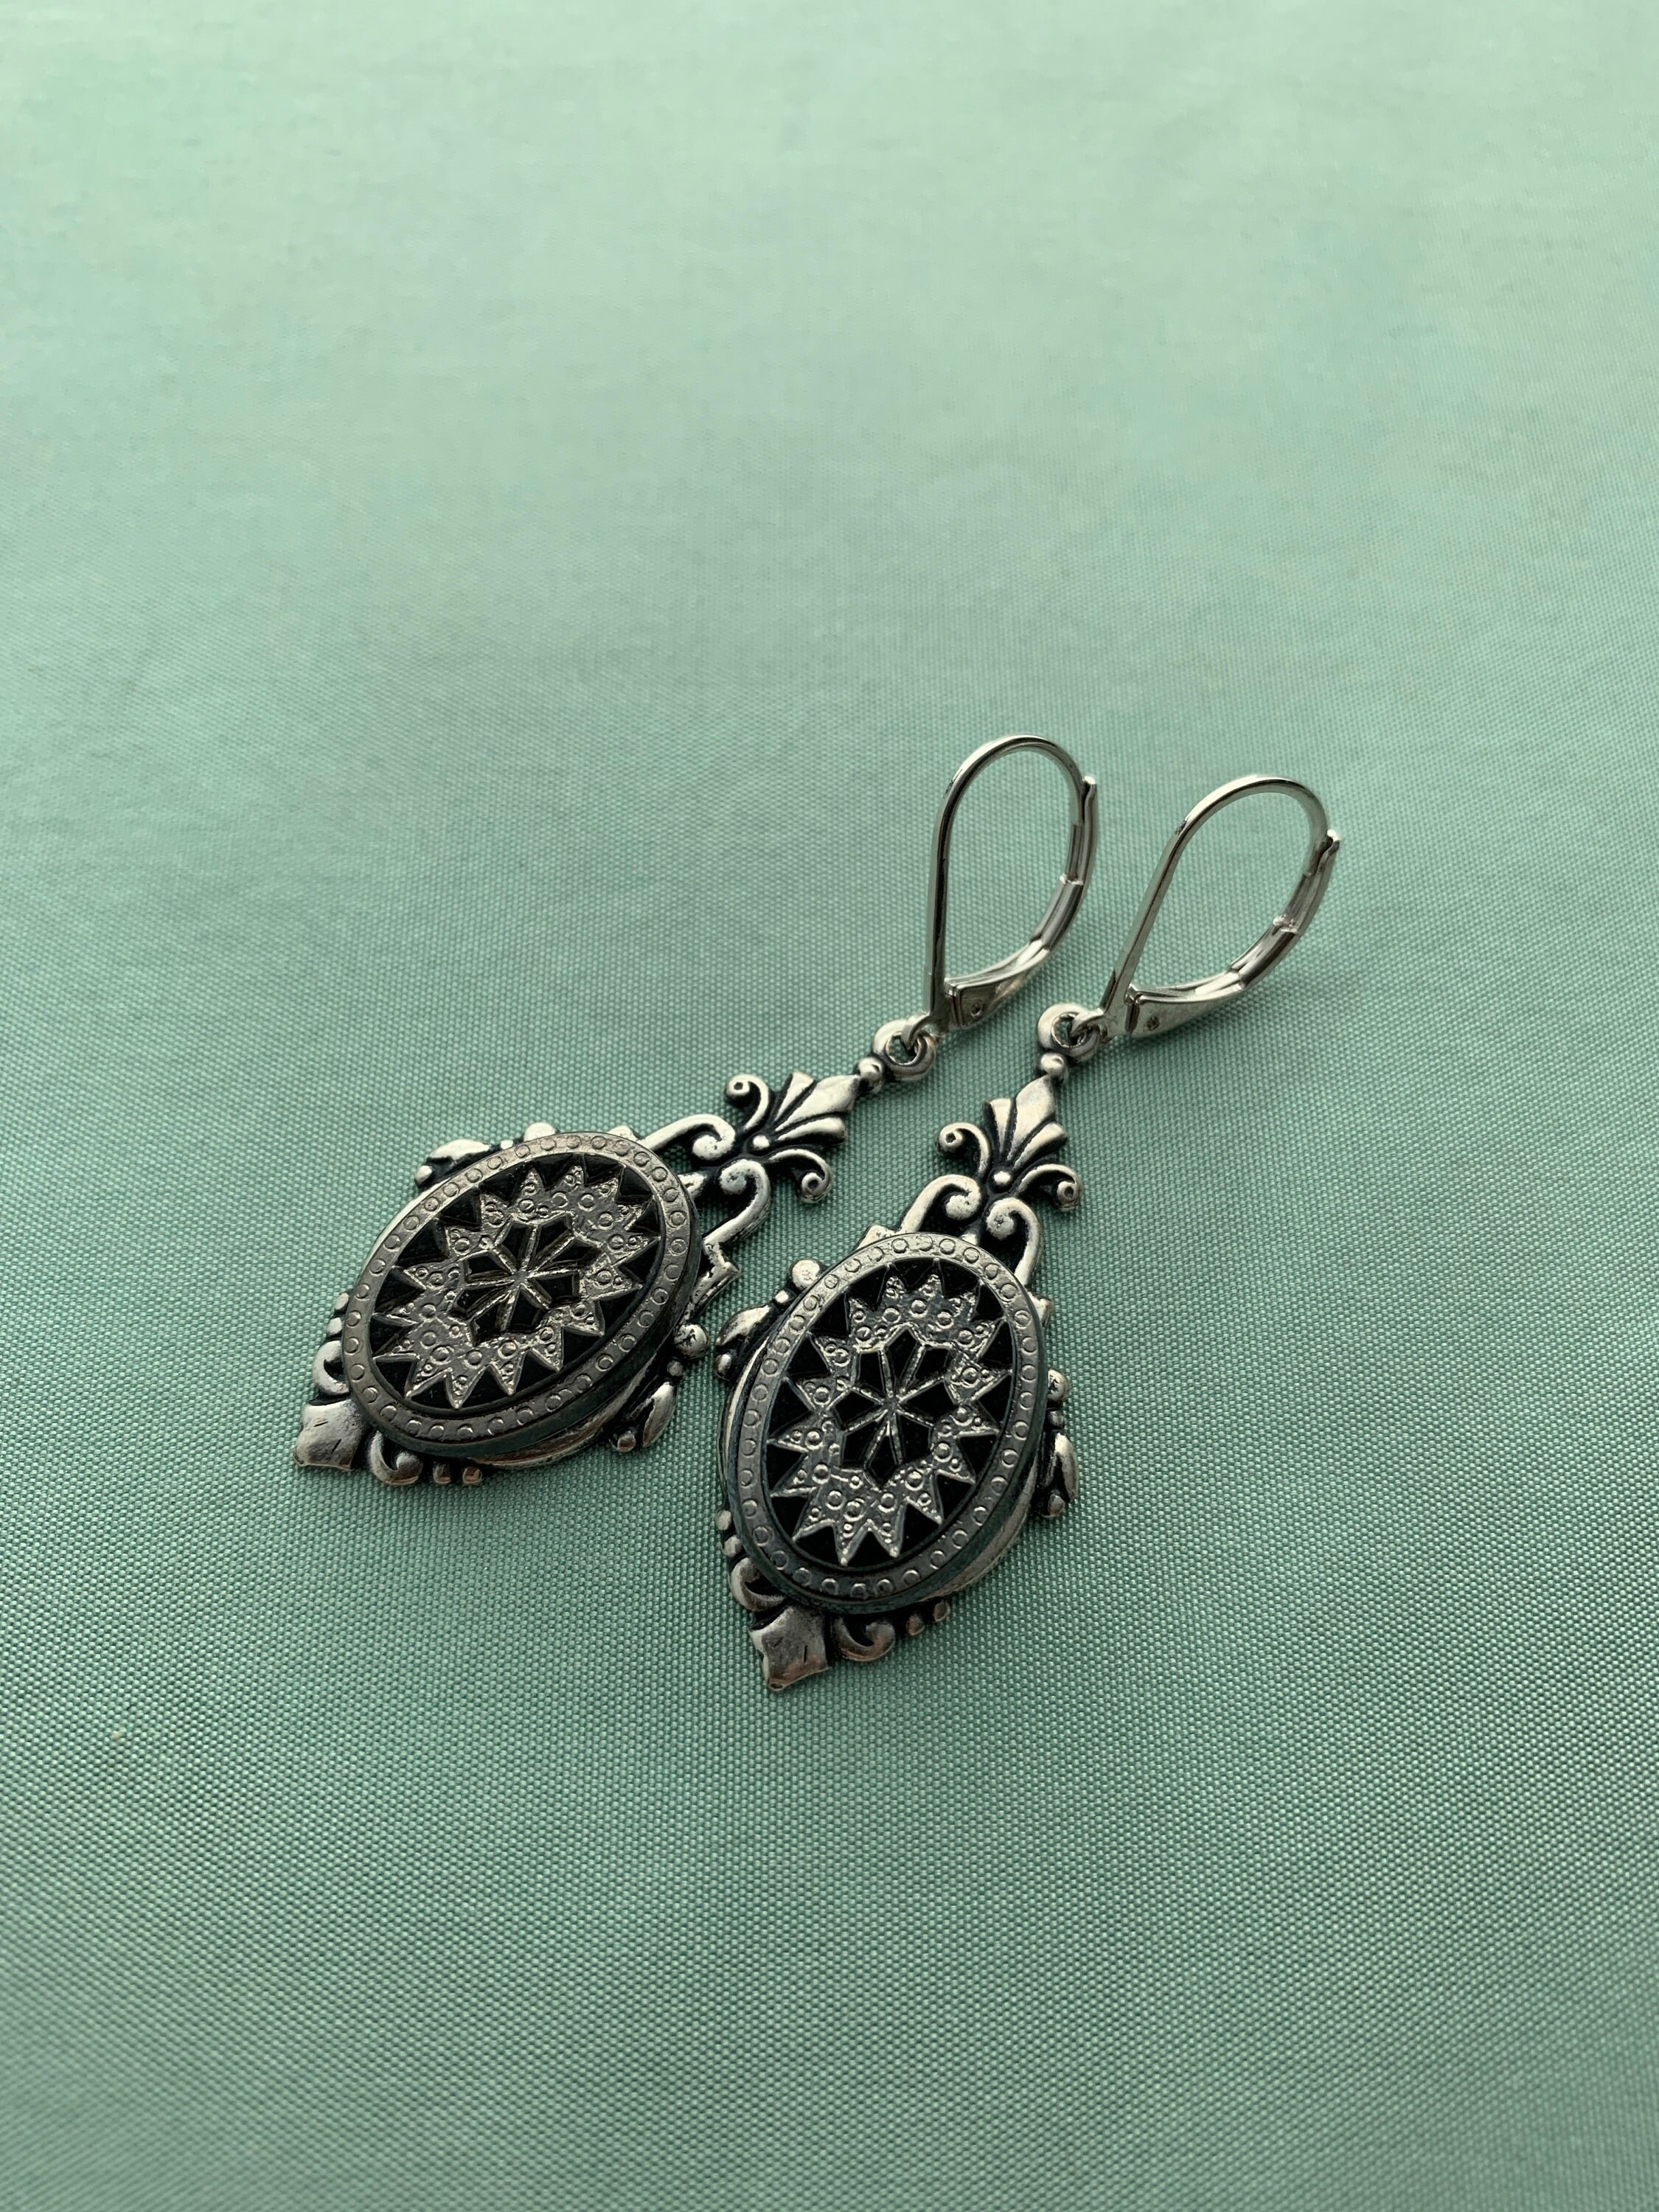 LE Victorian SILVER Intaglio Earrings SILVER and Black | Etsy